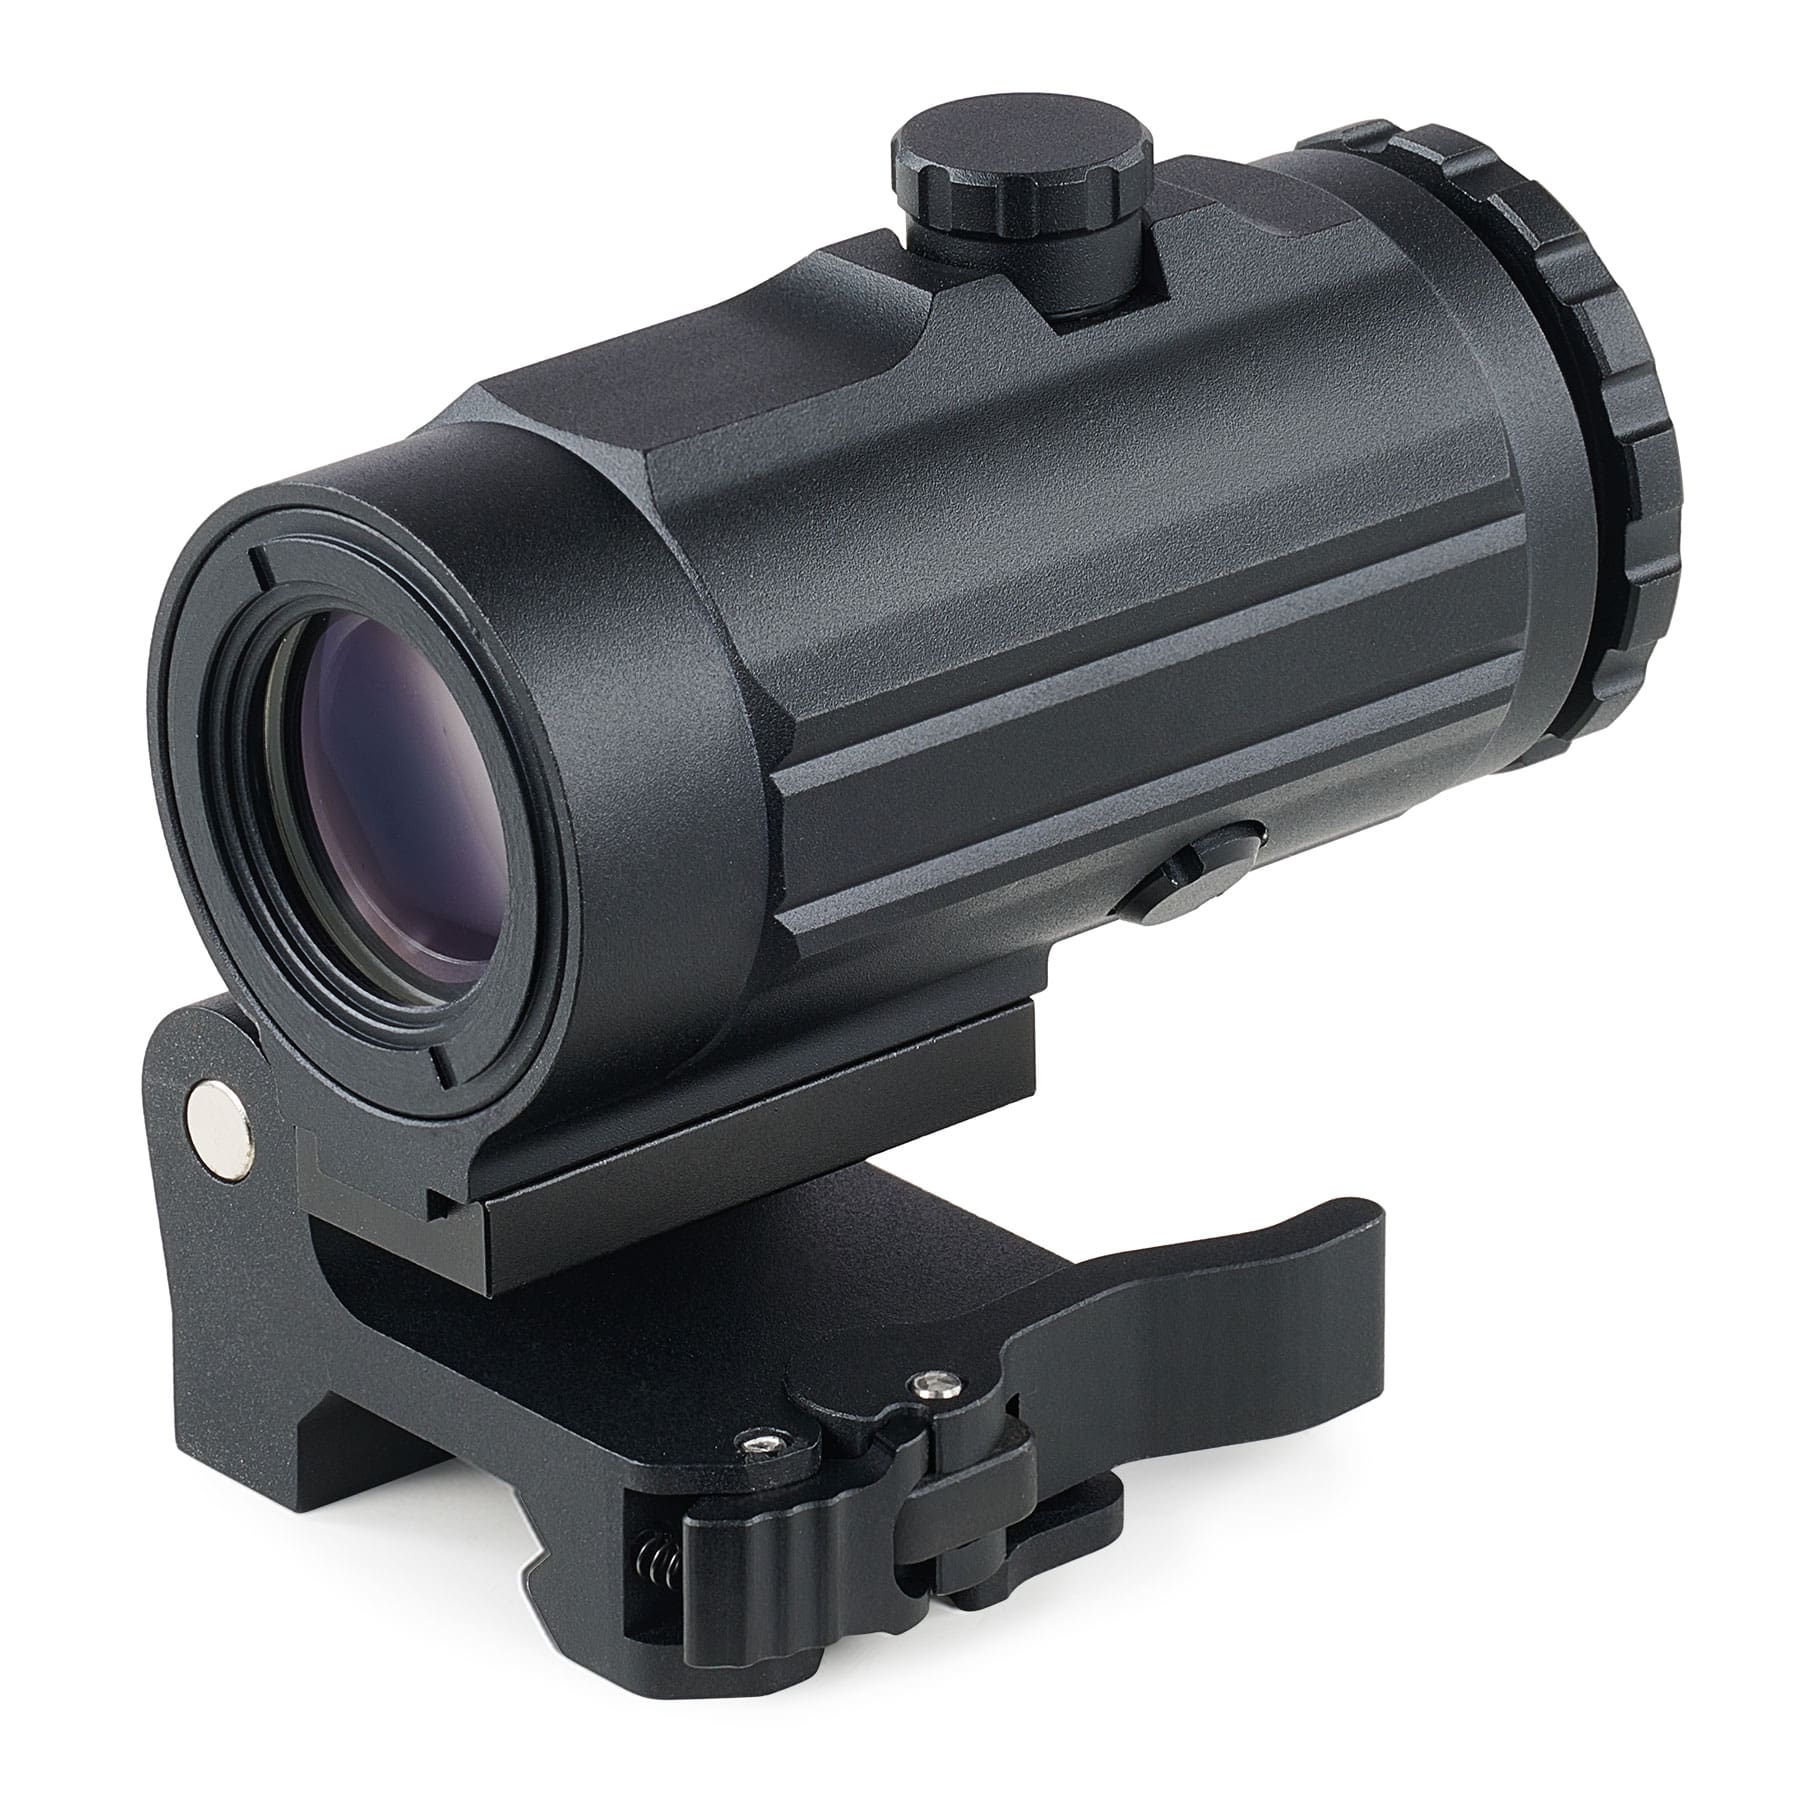 Red-Dot-Magnifier-with-Flip-to-Side-QD-Mount-3x22-Reflex-Sight-Magnifier-Gun-Scope-with-Flip-Mount-for-Weaver-Picatinny-Rails-Monocular-with-Diopter-Adjustment-for-Rifles-Airsoft-Guns